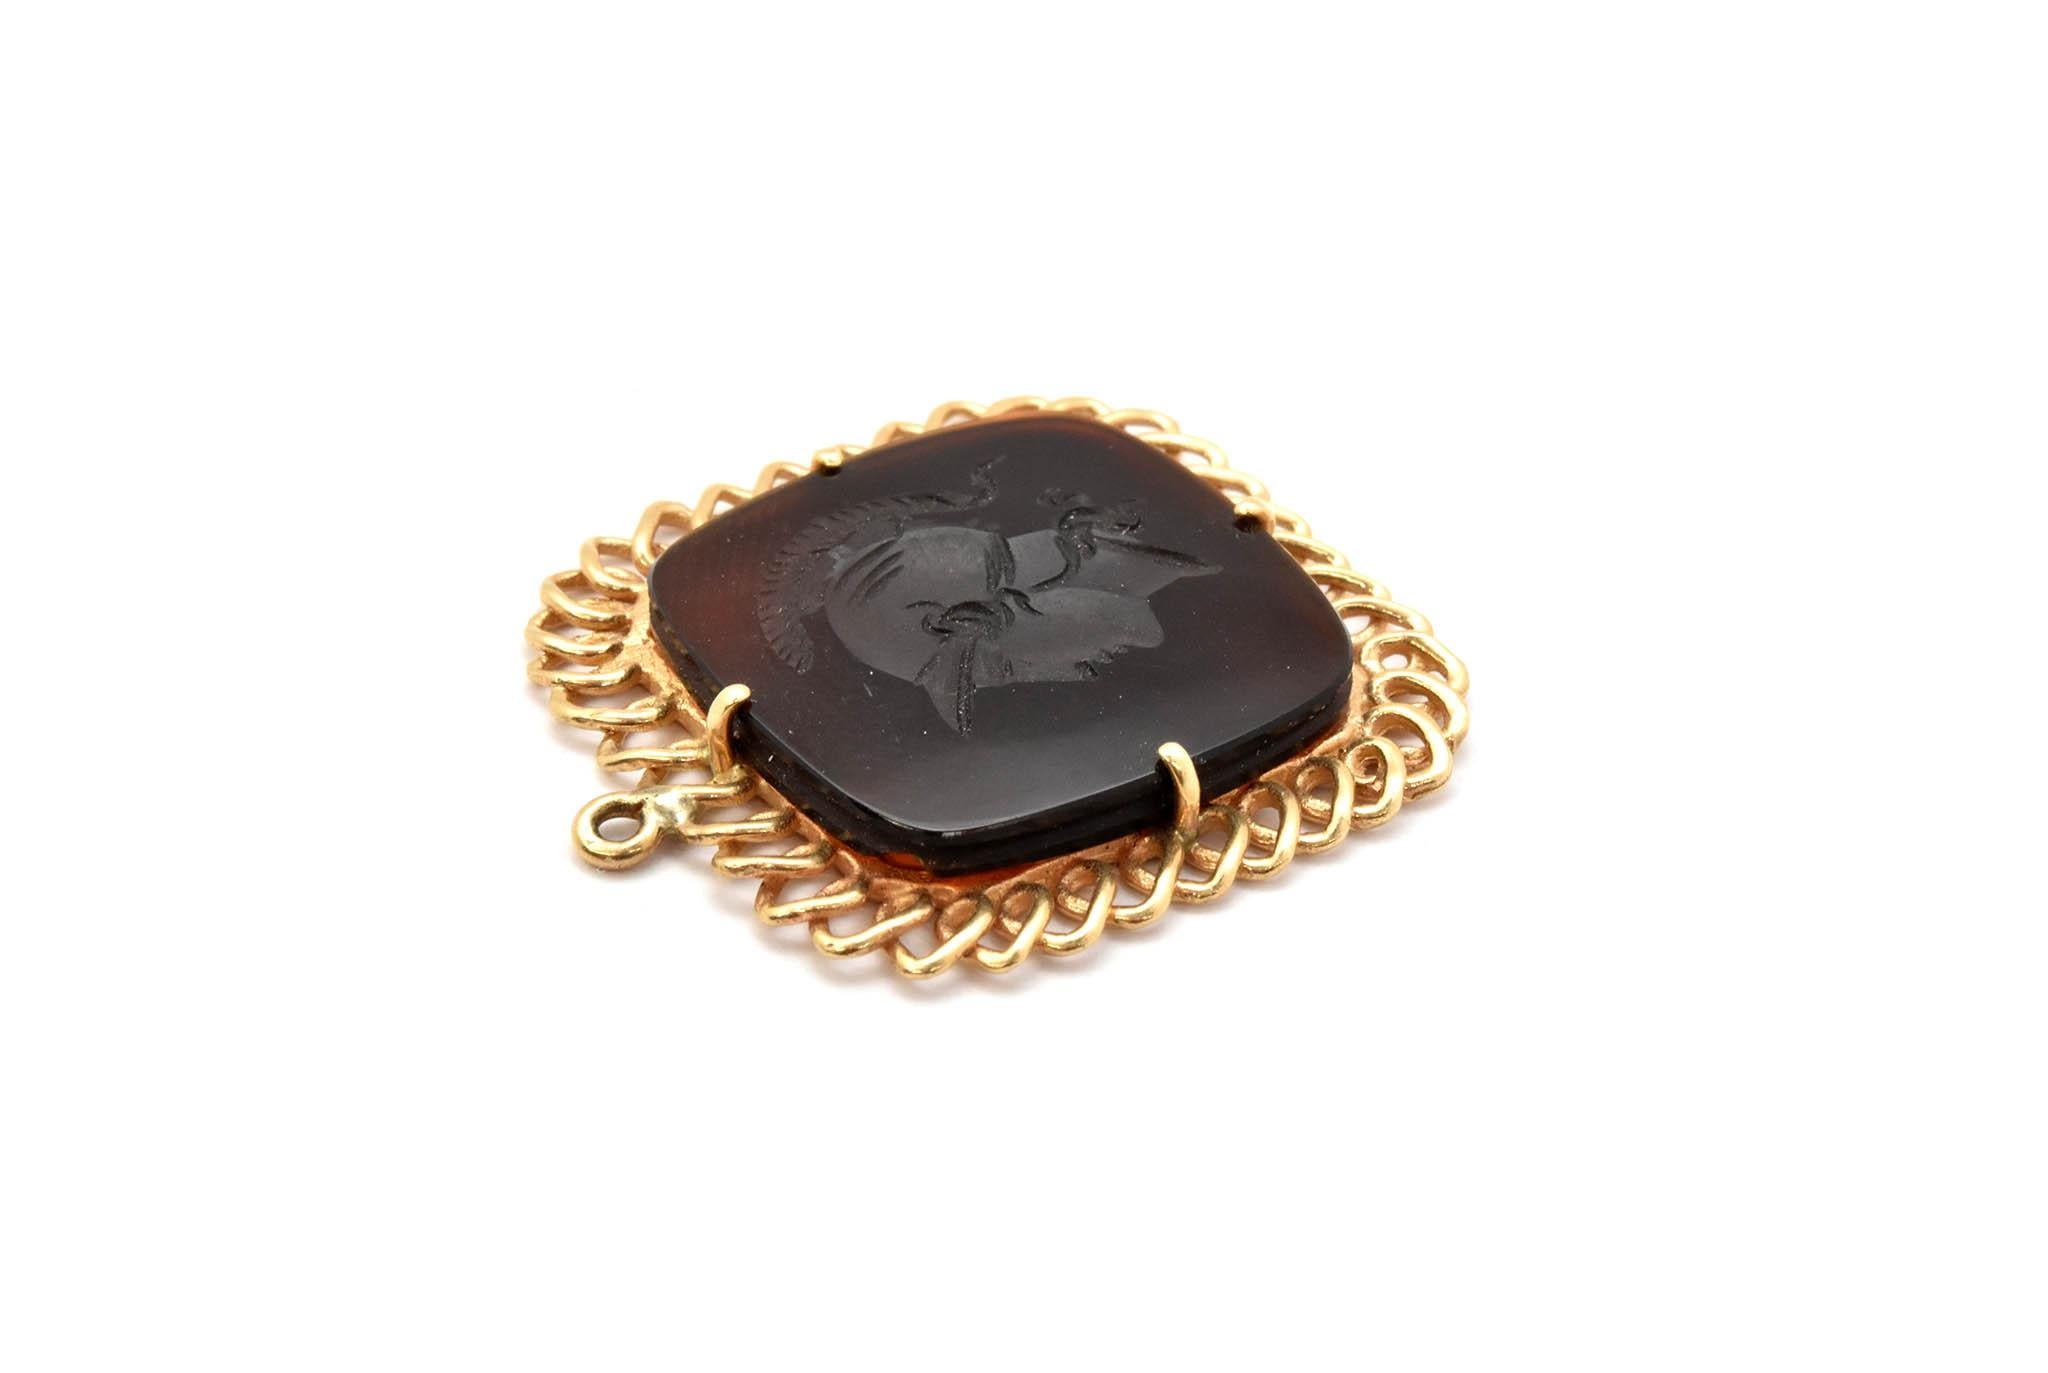 This pendant features a brown stone carved with an intaglio. The intaglio is set into a 14k yellow gold pendant setting. The piece measures 26x29mm, and it weighs 5.0 grams.